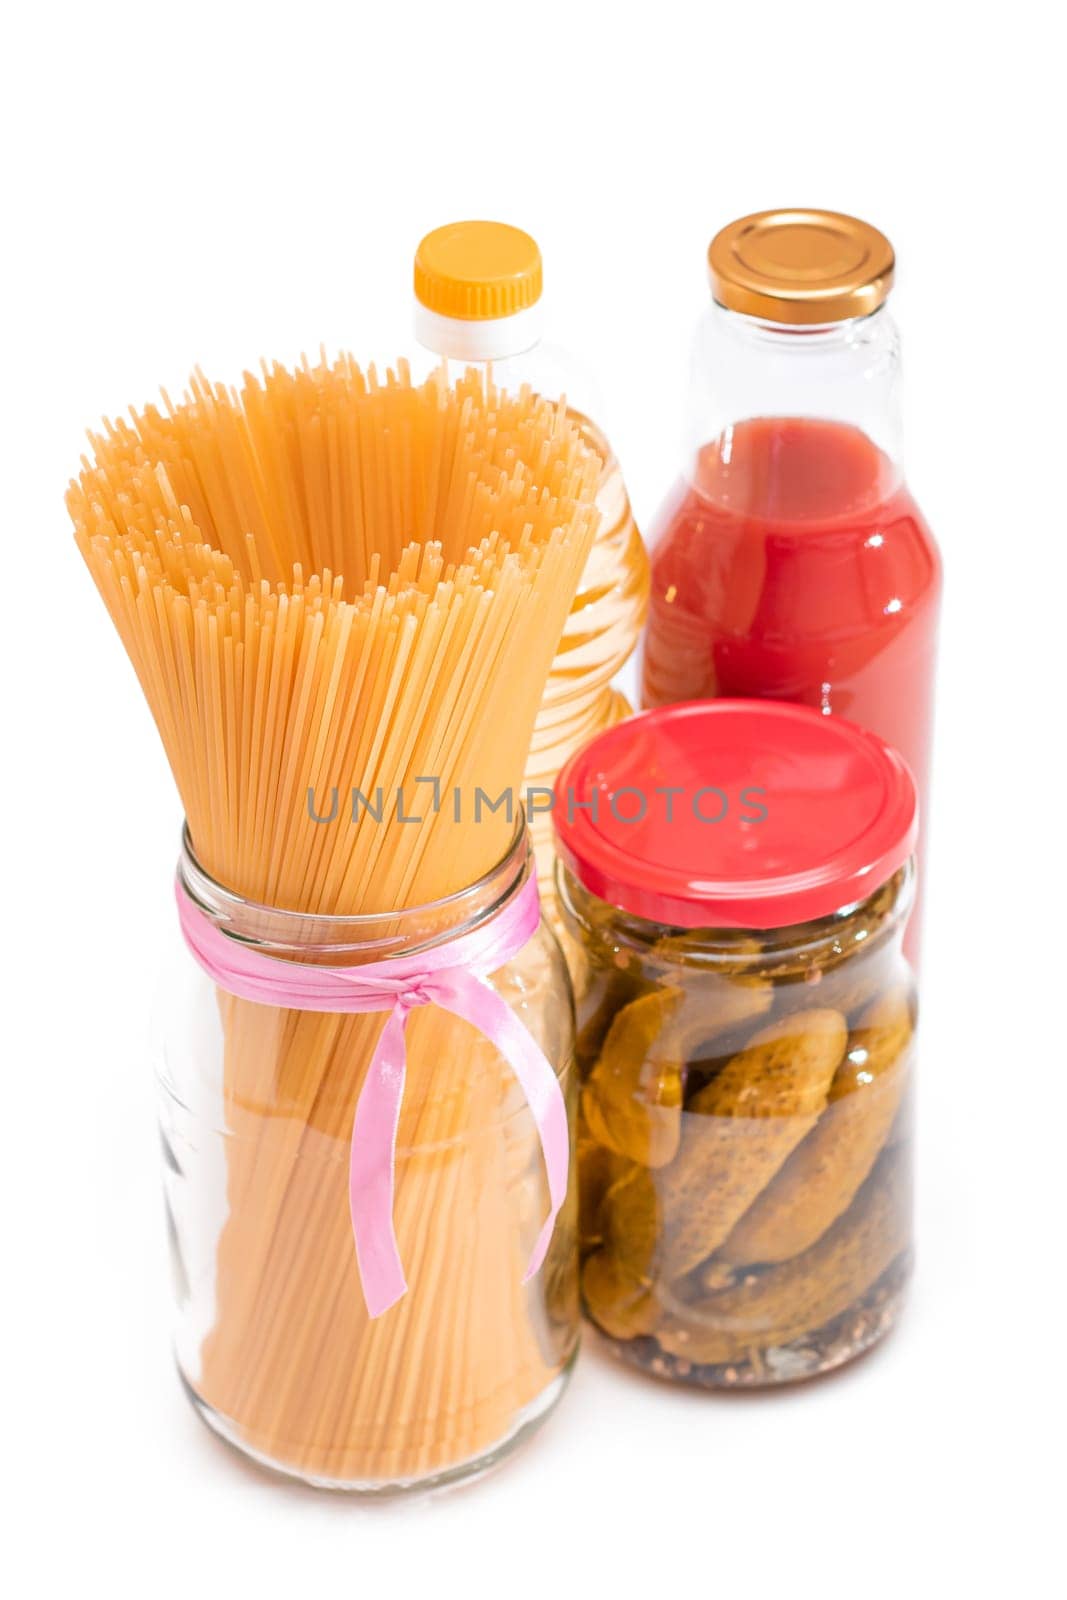 Food Reserves: Canned Food, Spaghetti, Pickles and Tomato Juice - Isolated on White Background by InfinitumProdux